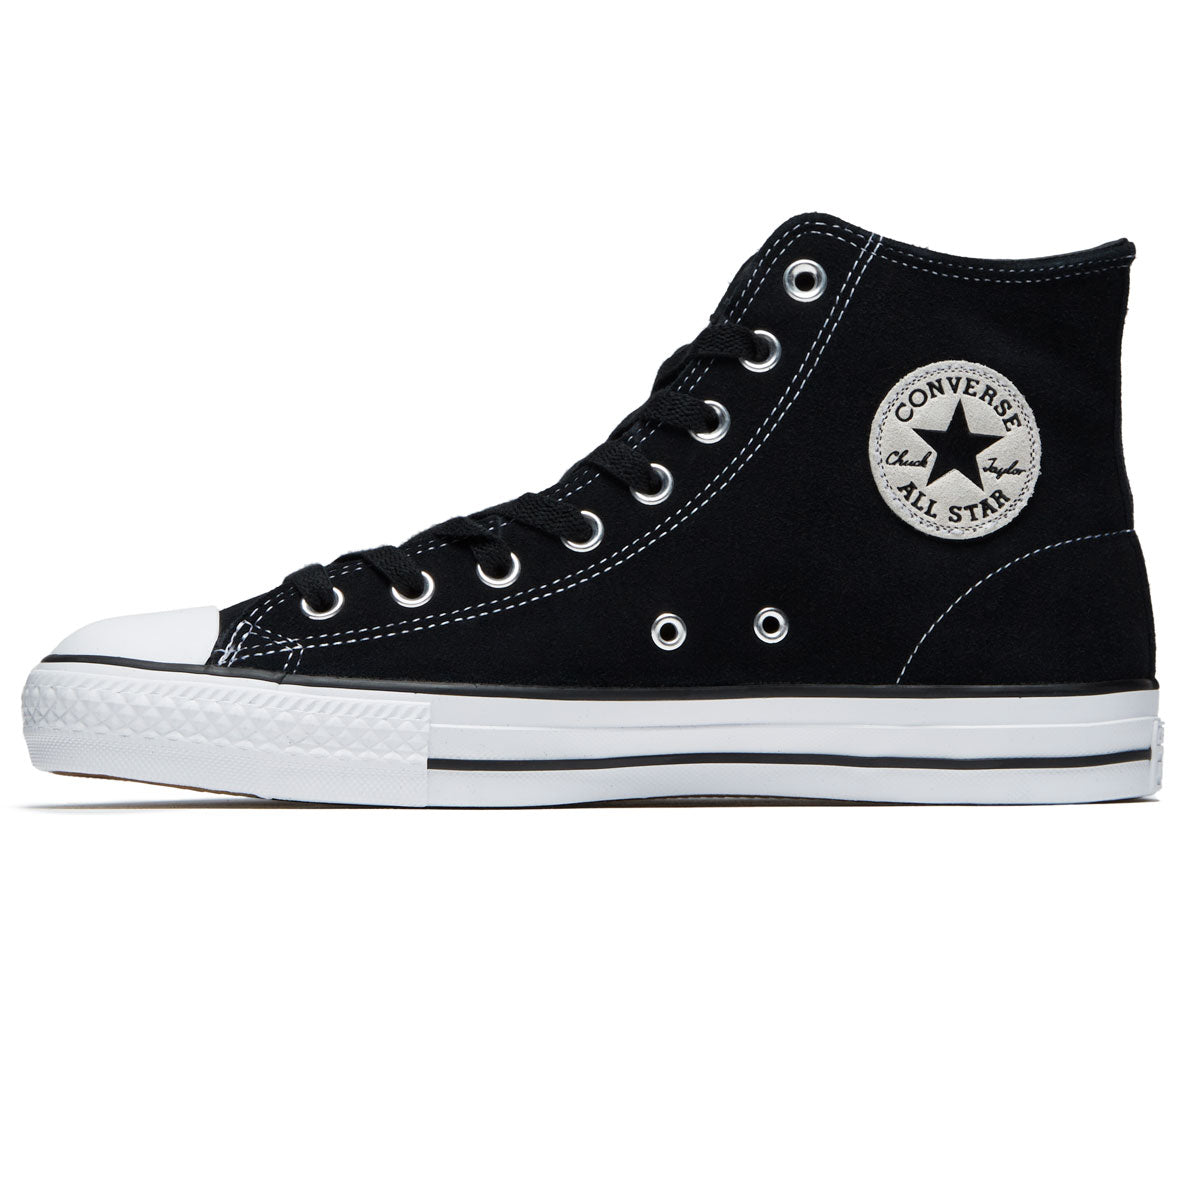 Converse Chuck Taylor All Star Pro Suede Hi Shoes - Black/Black/White image 2